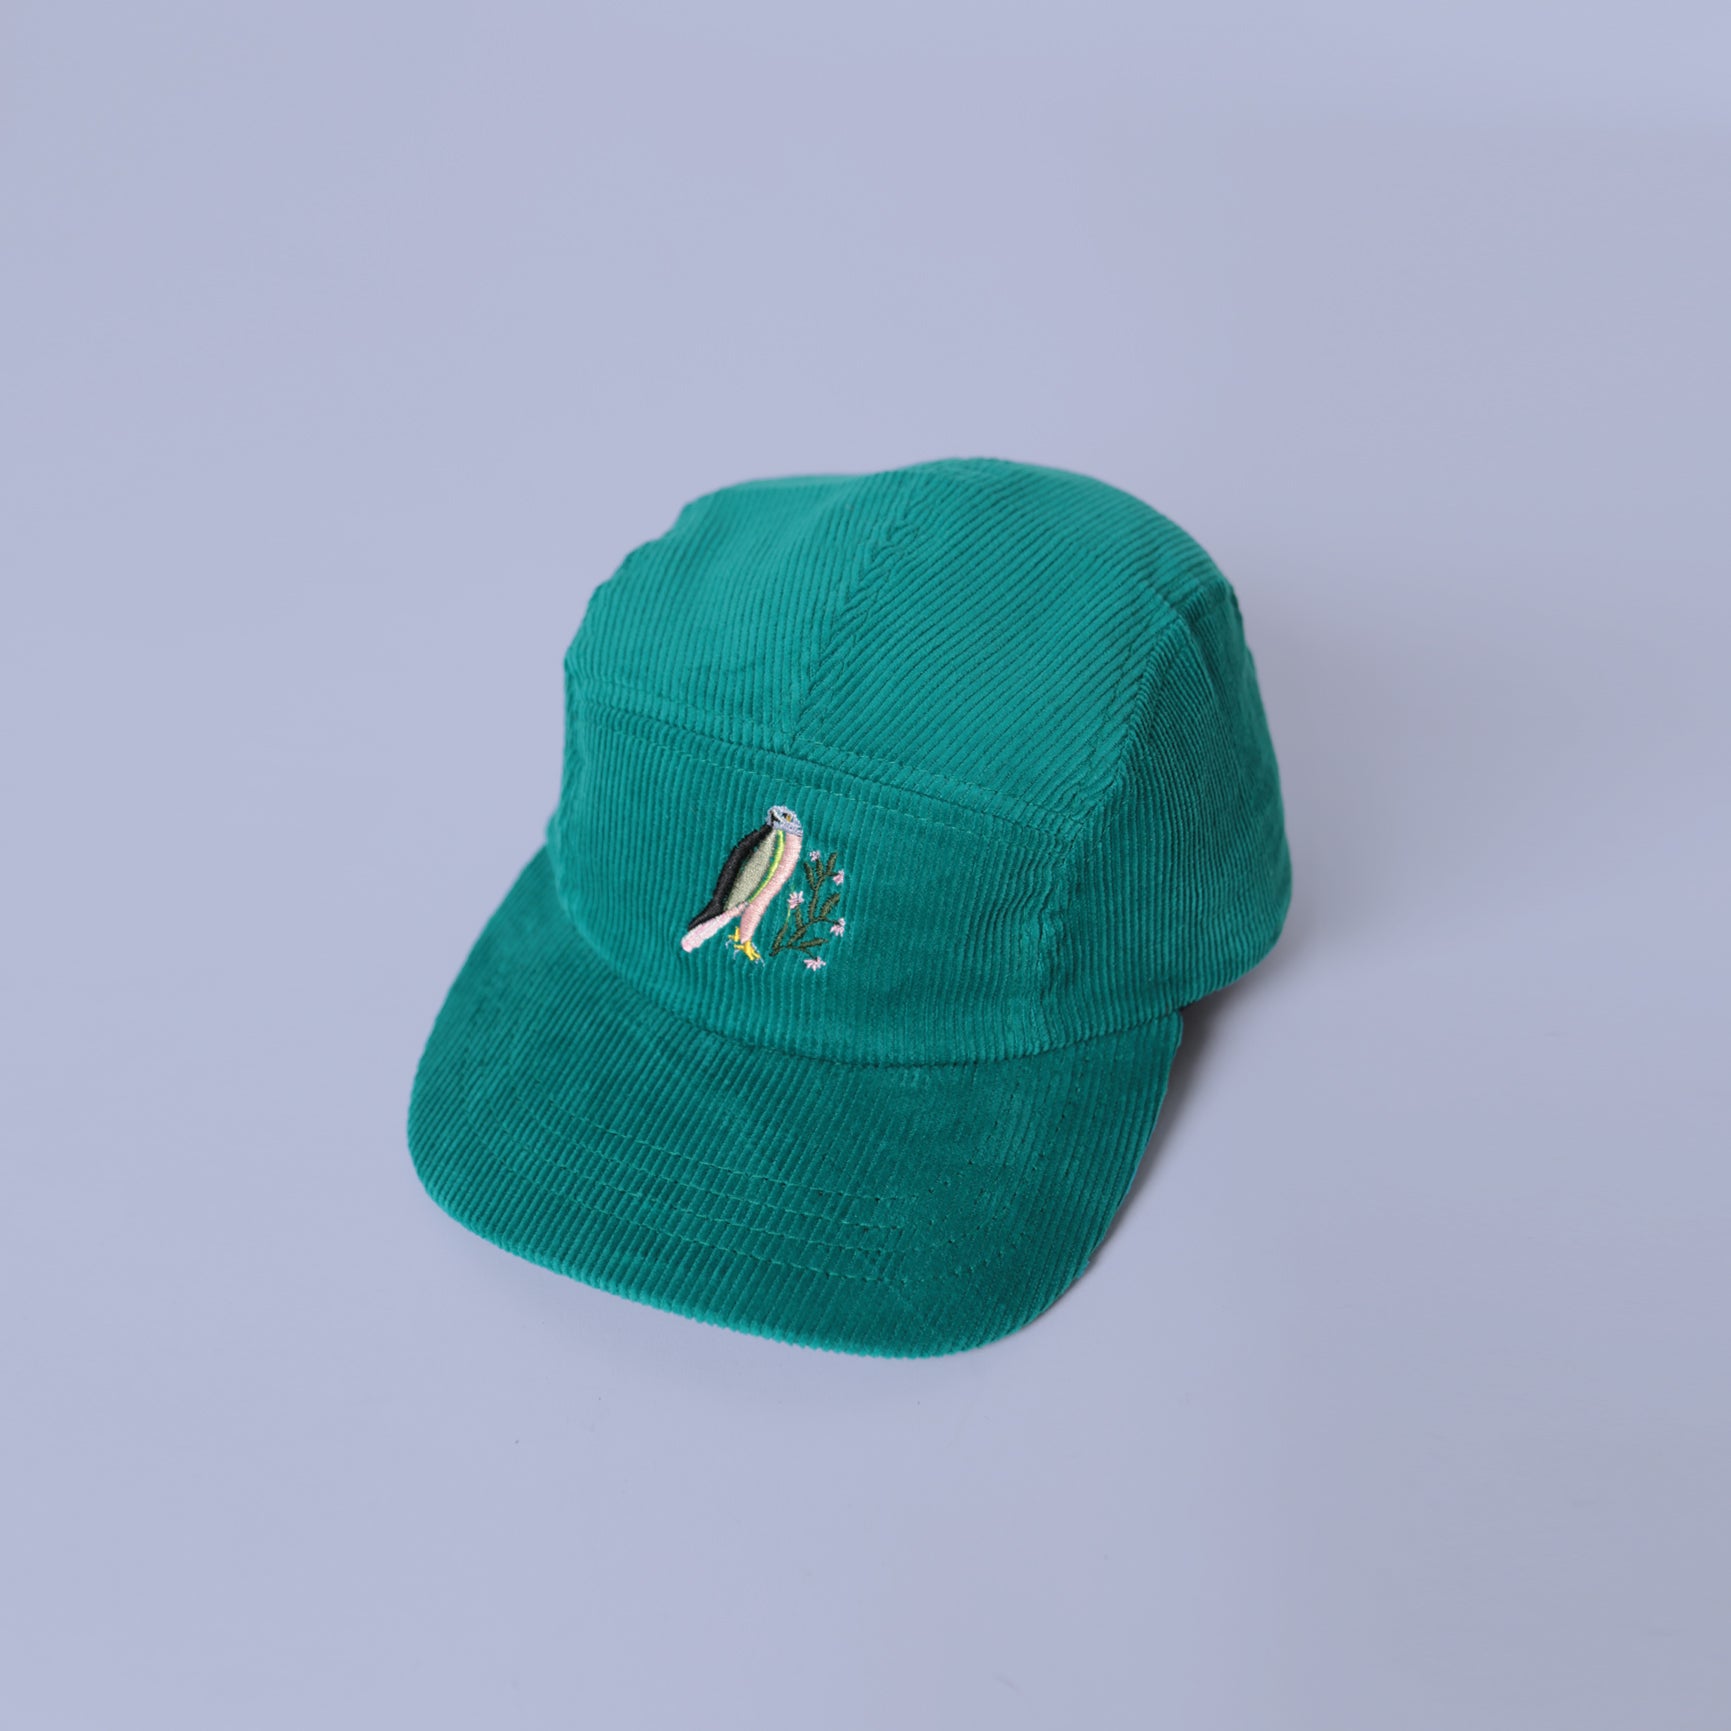 Kids 5 Panel - Teal Cord - Flower Bird Embroidery